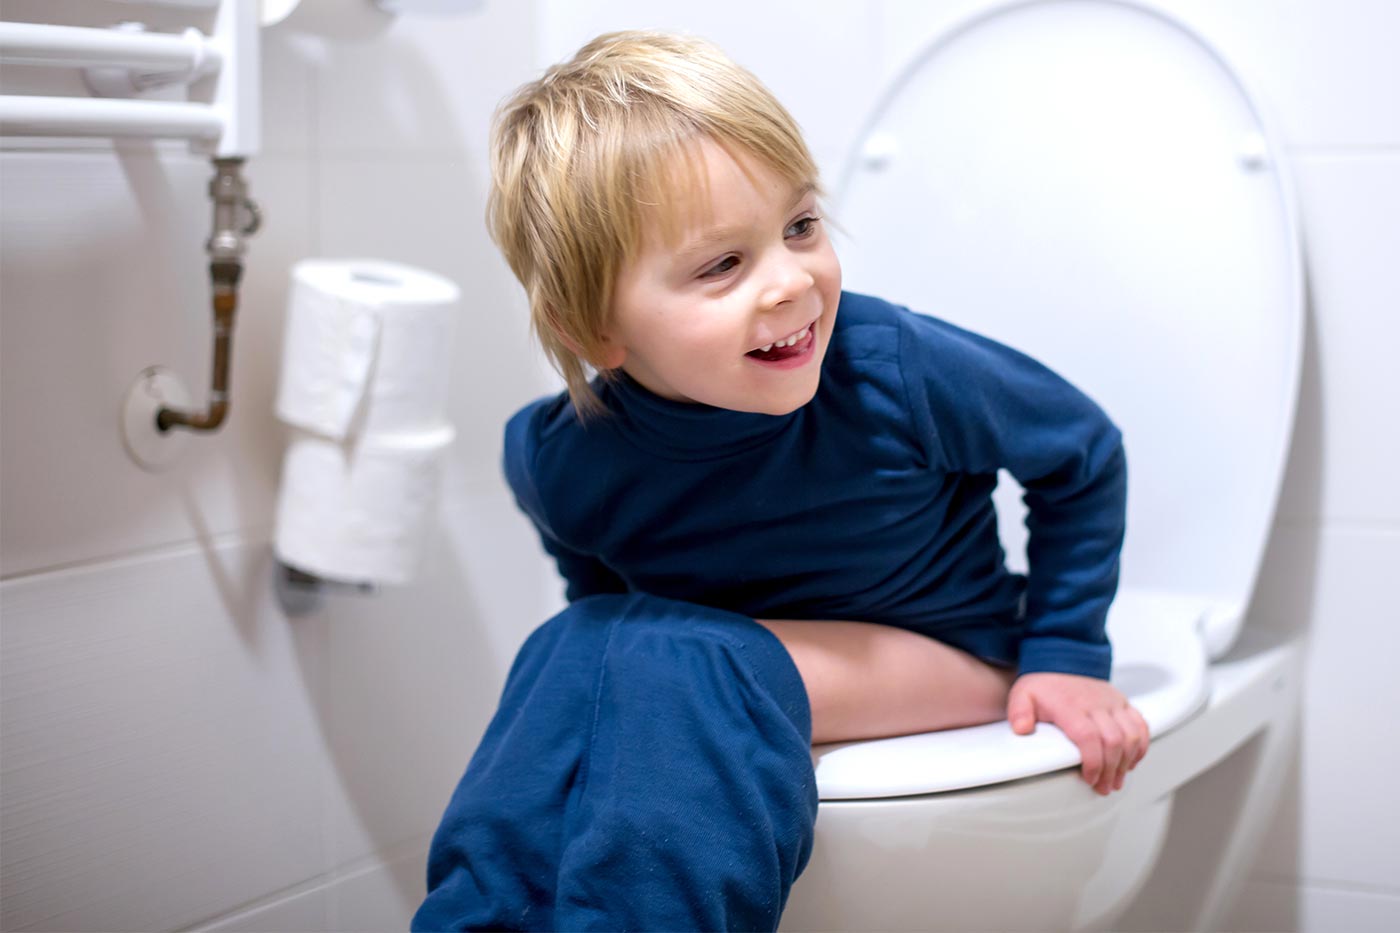 How to Get Your Toddler to Poop in the Potty